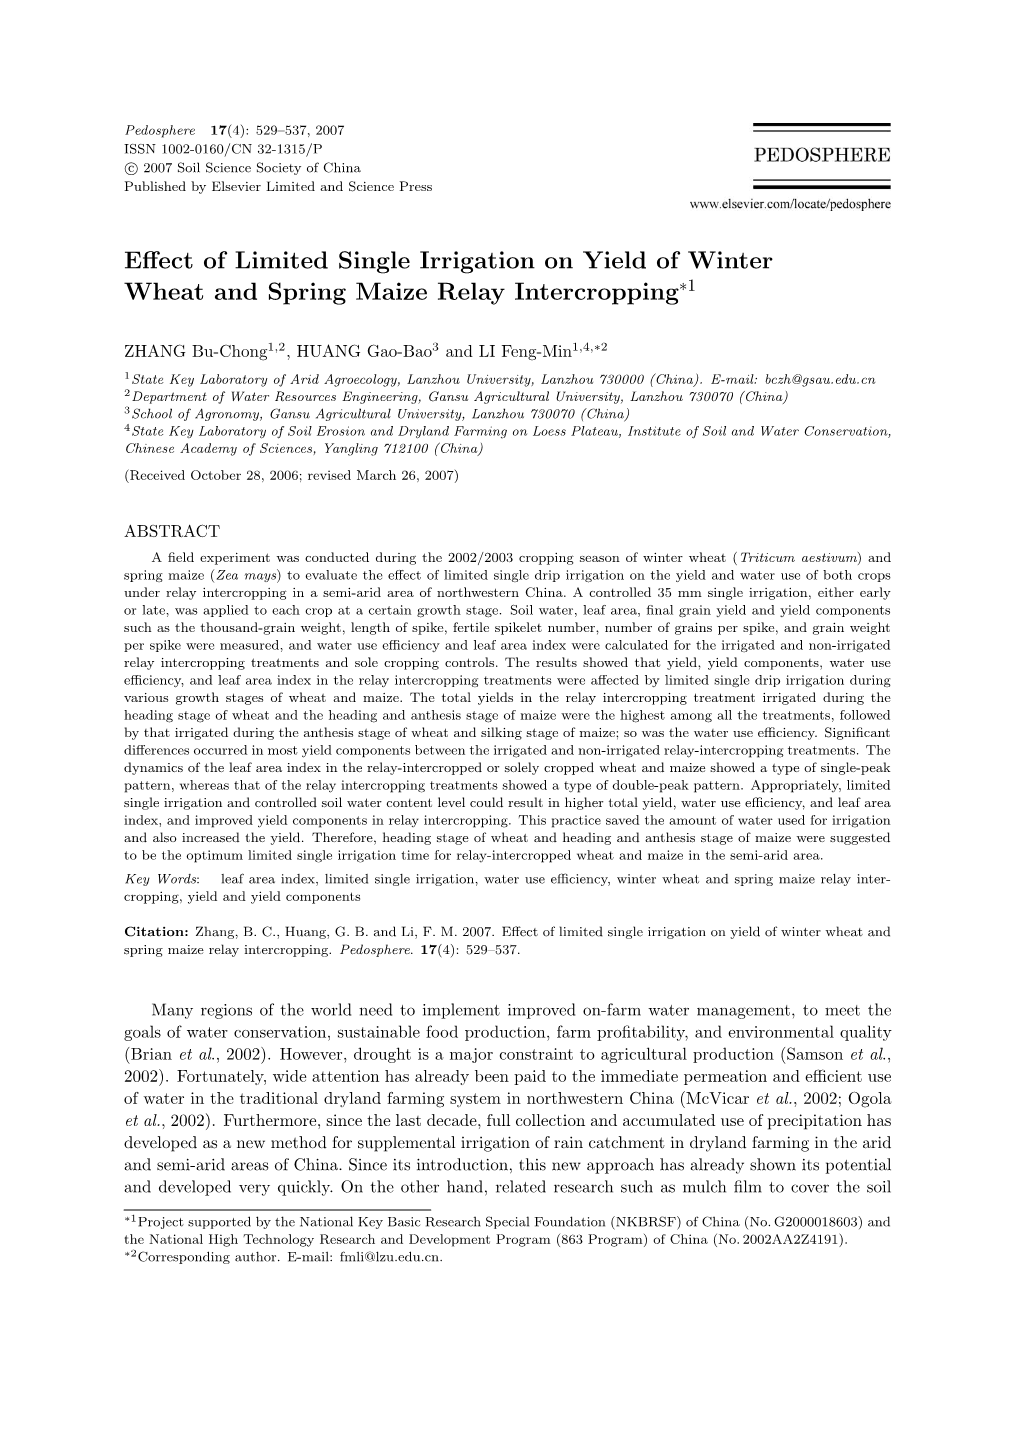 Effect of Limited Single Irrigation on Yield of Winter Wheat and Spring